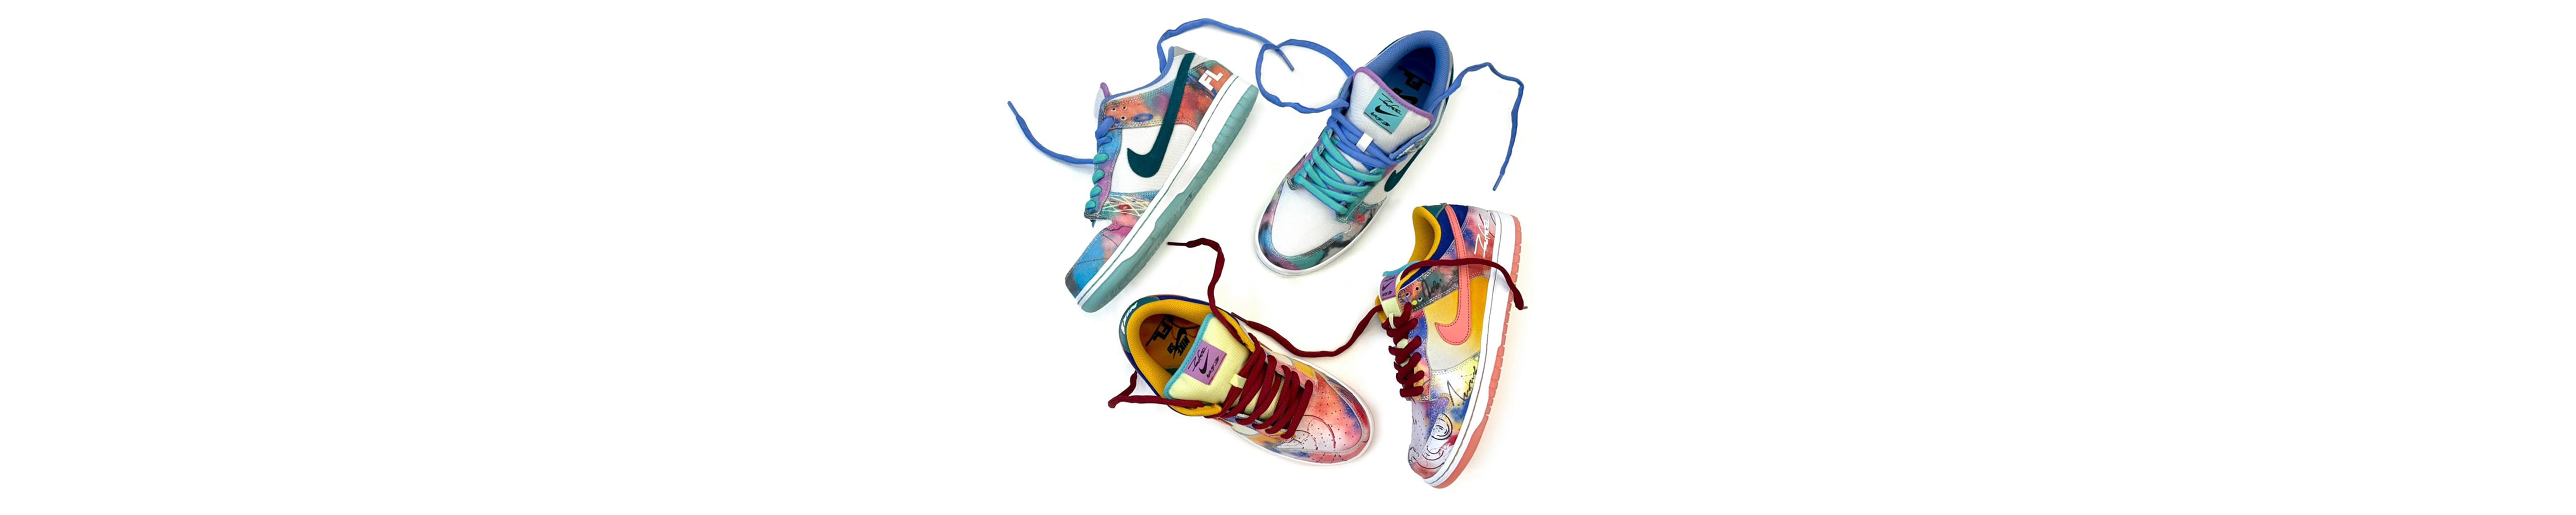 The New Futura x Nike Dunk Low Collaboration Is Set to Drop in May